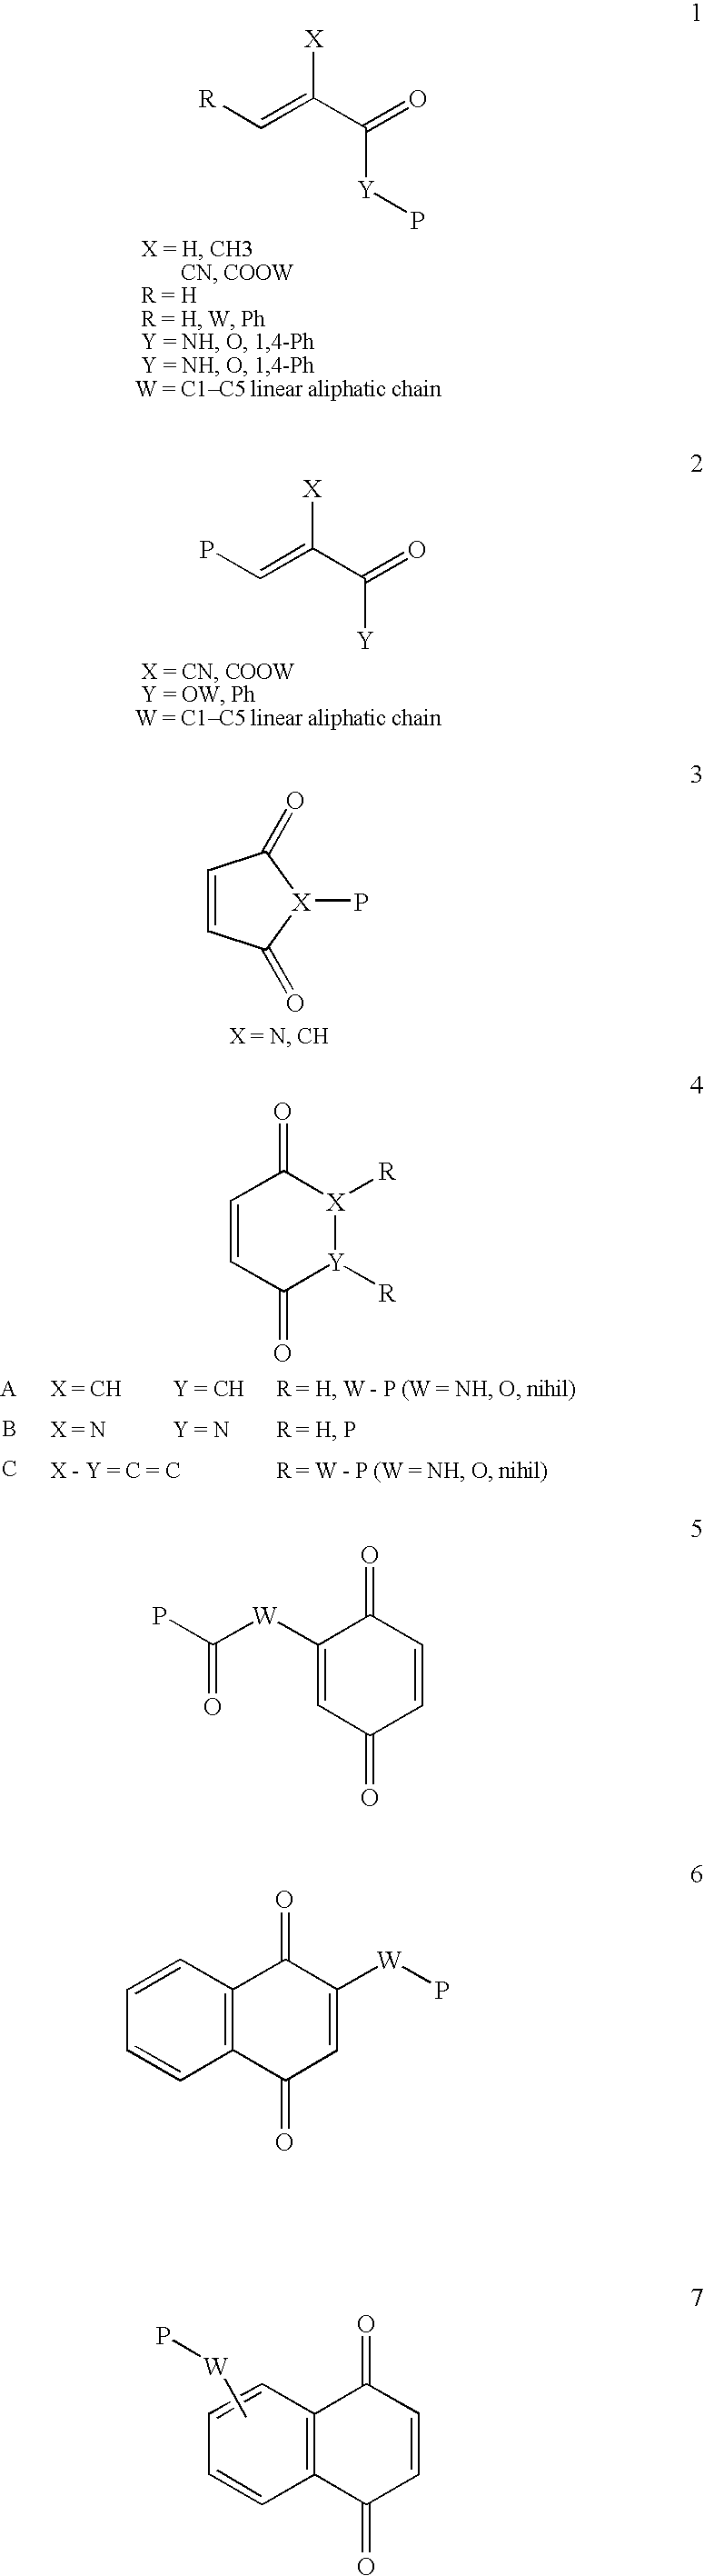 Conjugate addition reactions for the controlled delivery of pharmaceutically active compounds